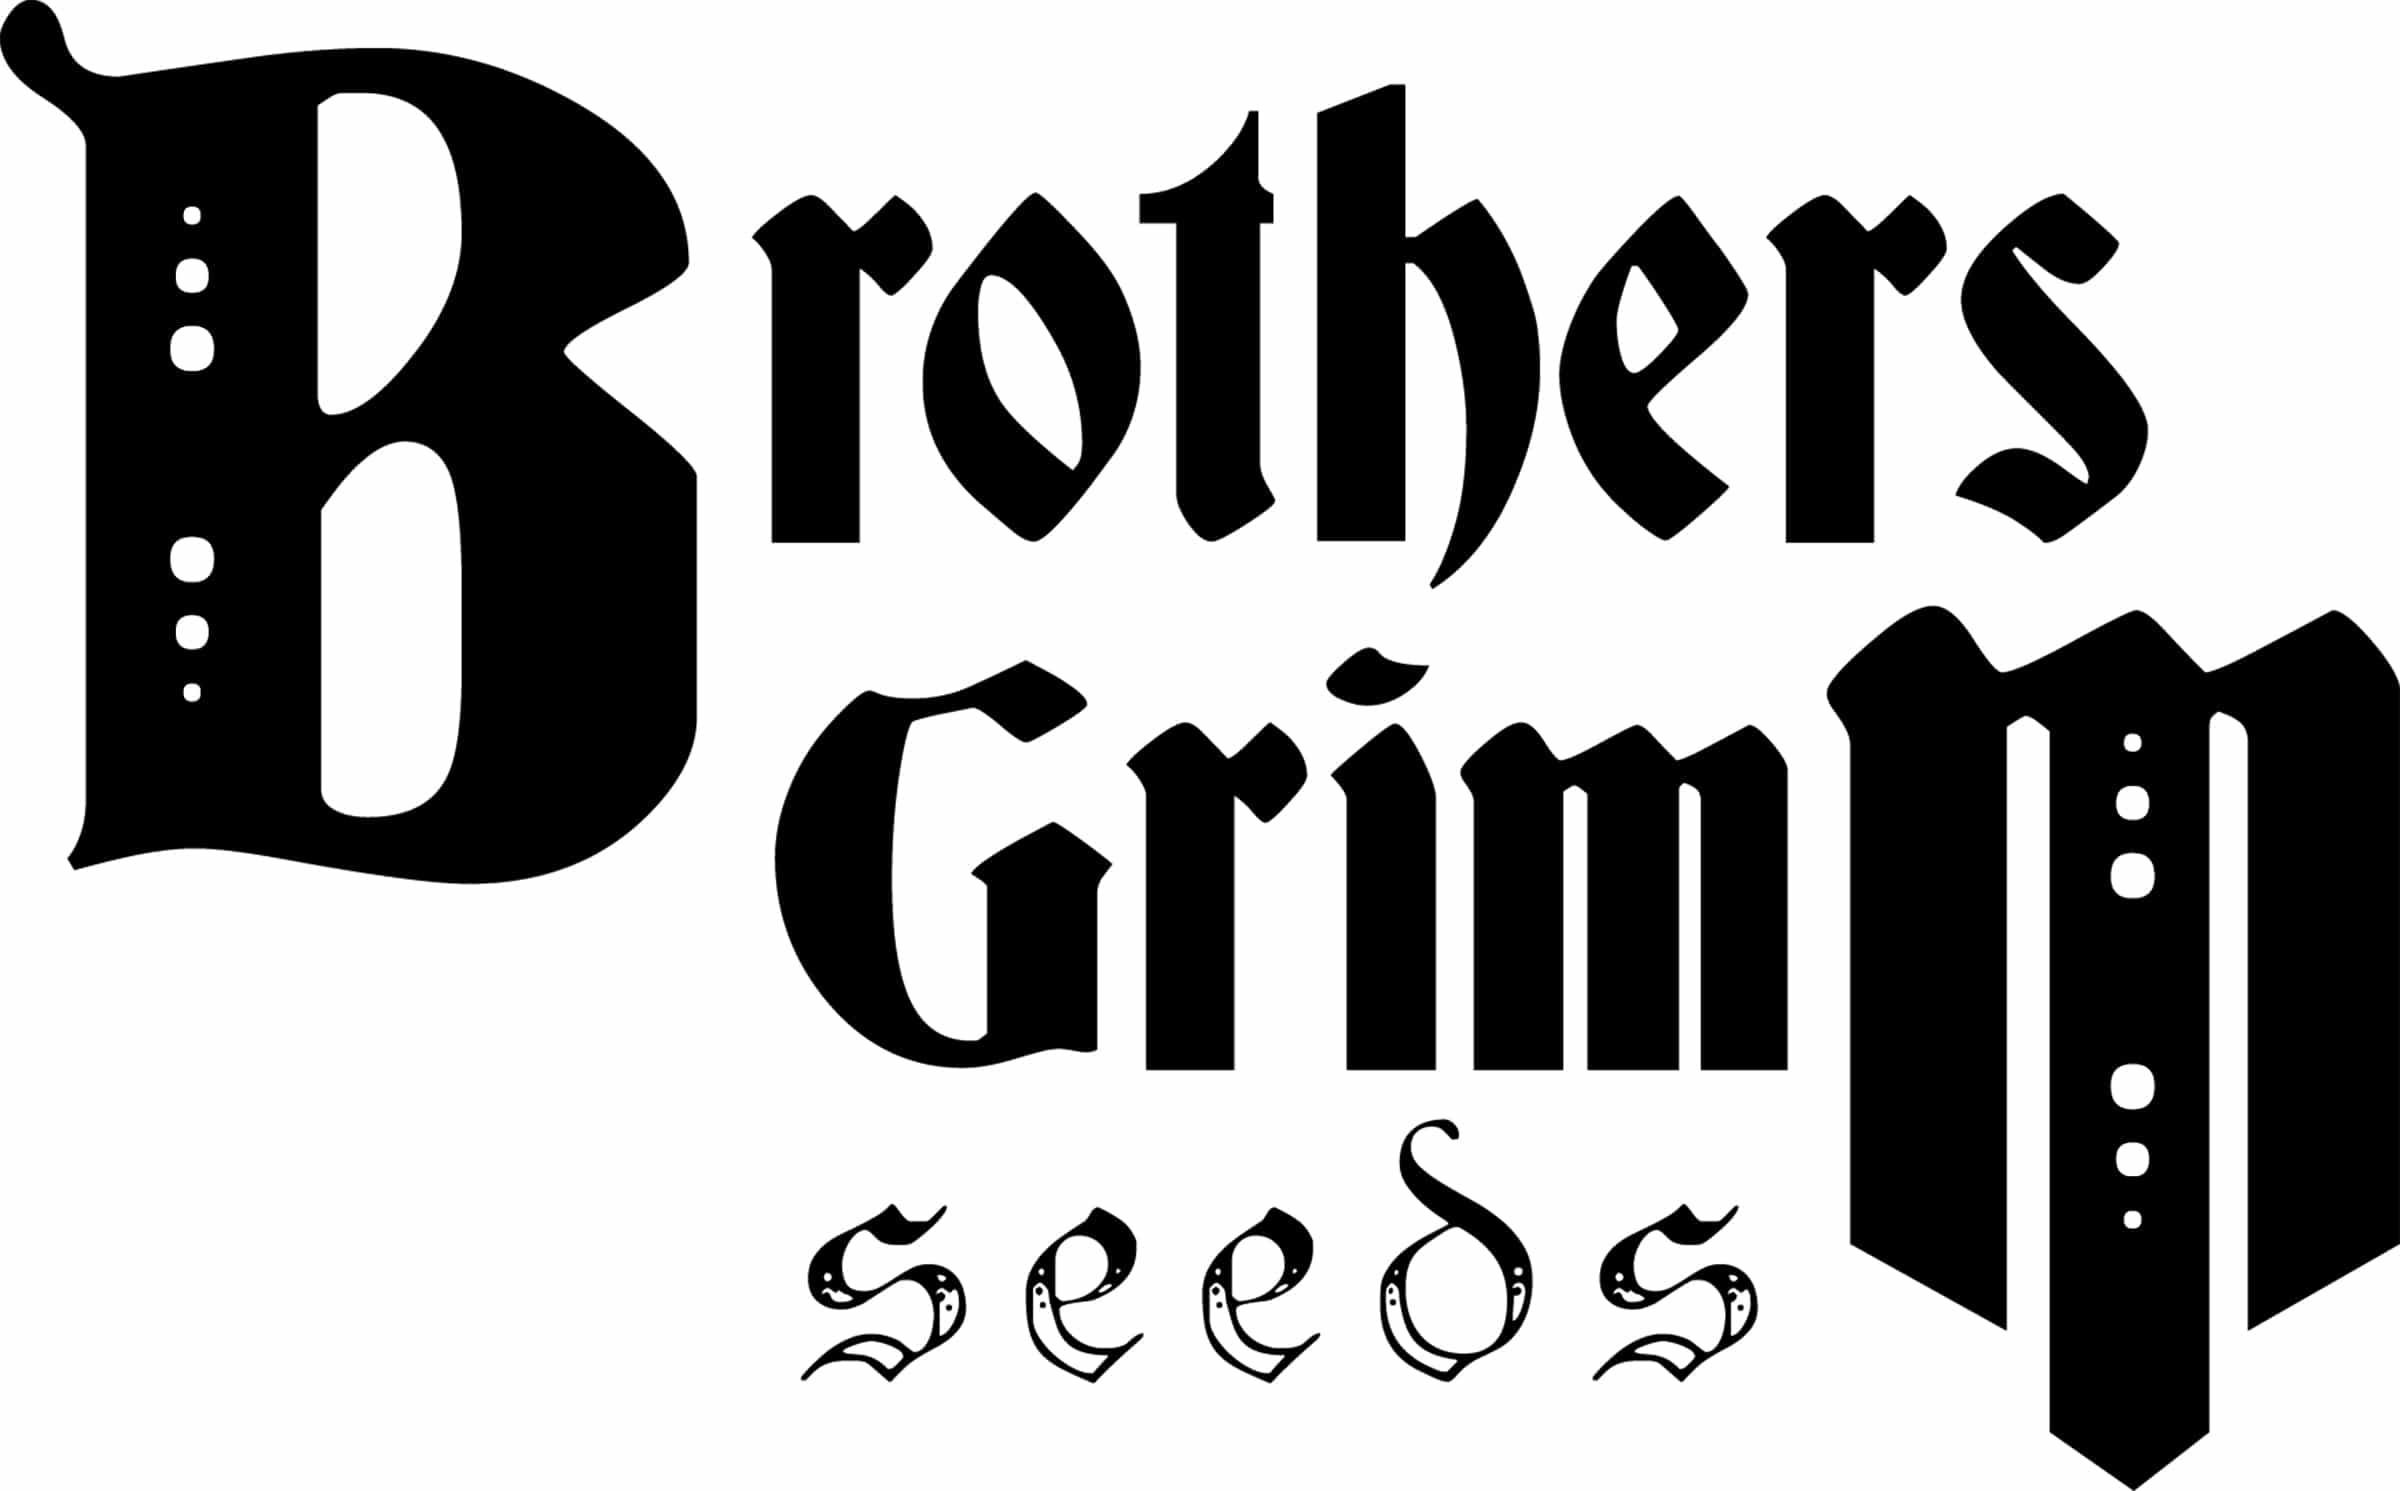 Brother's Grimm Seeds